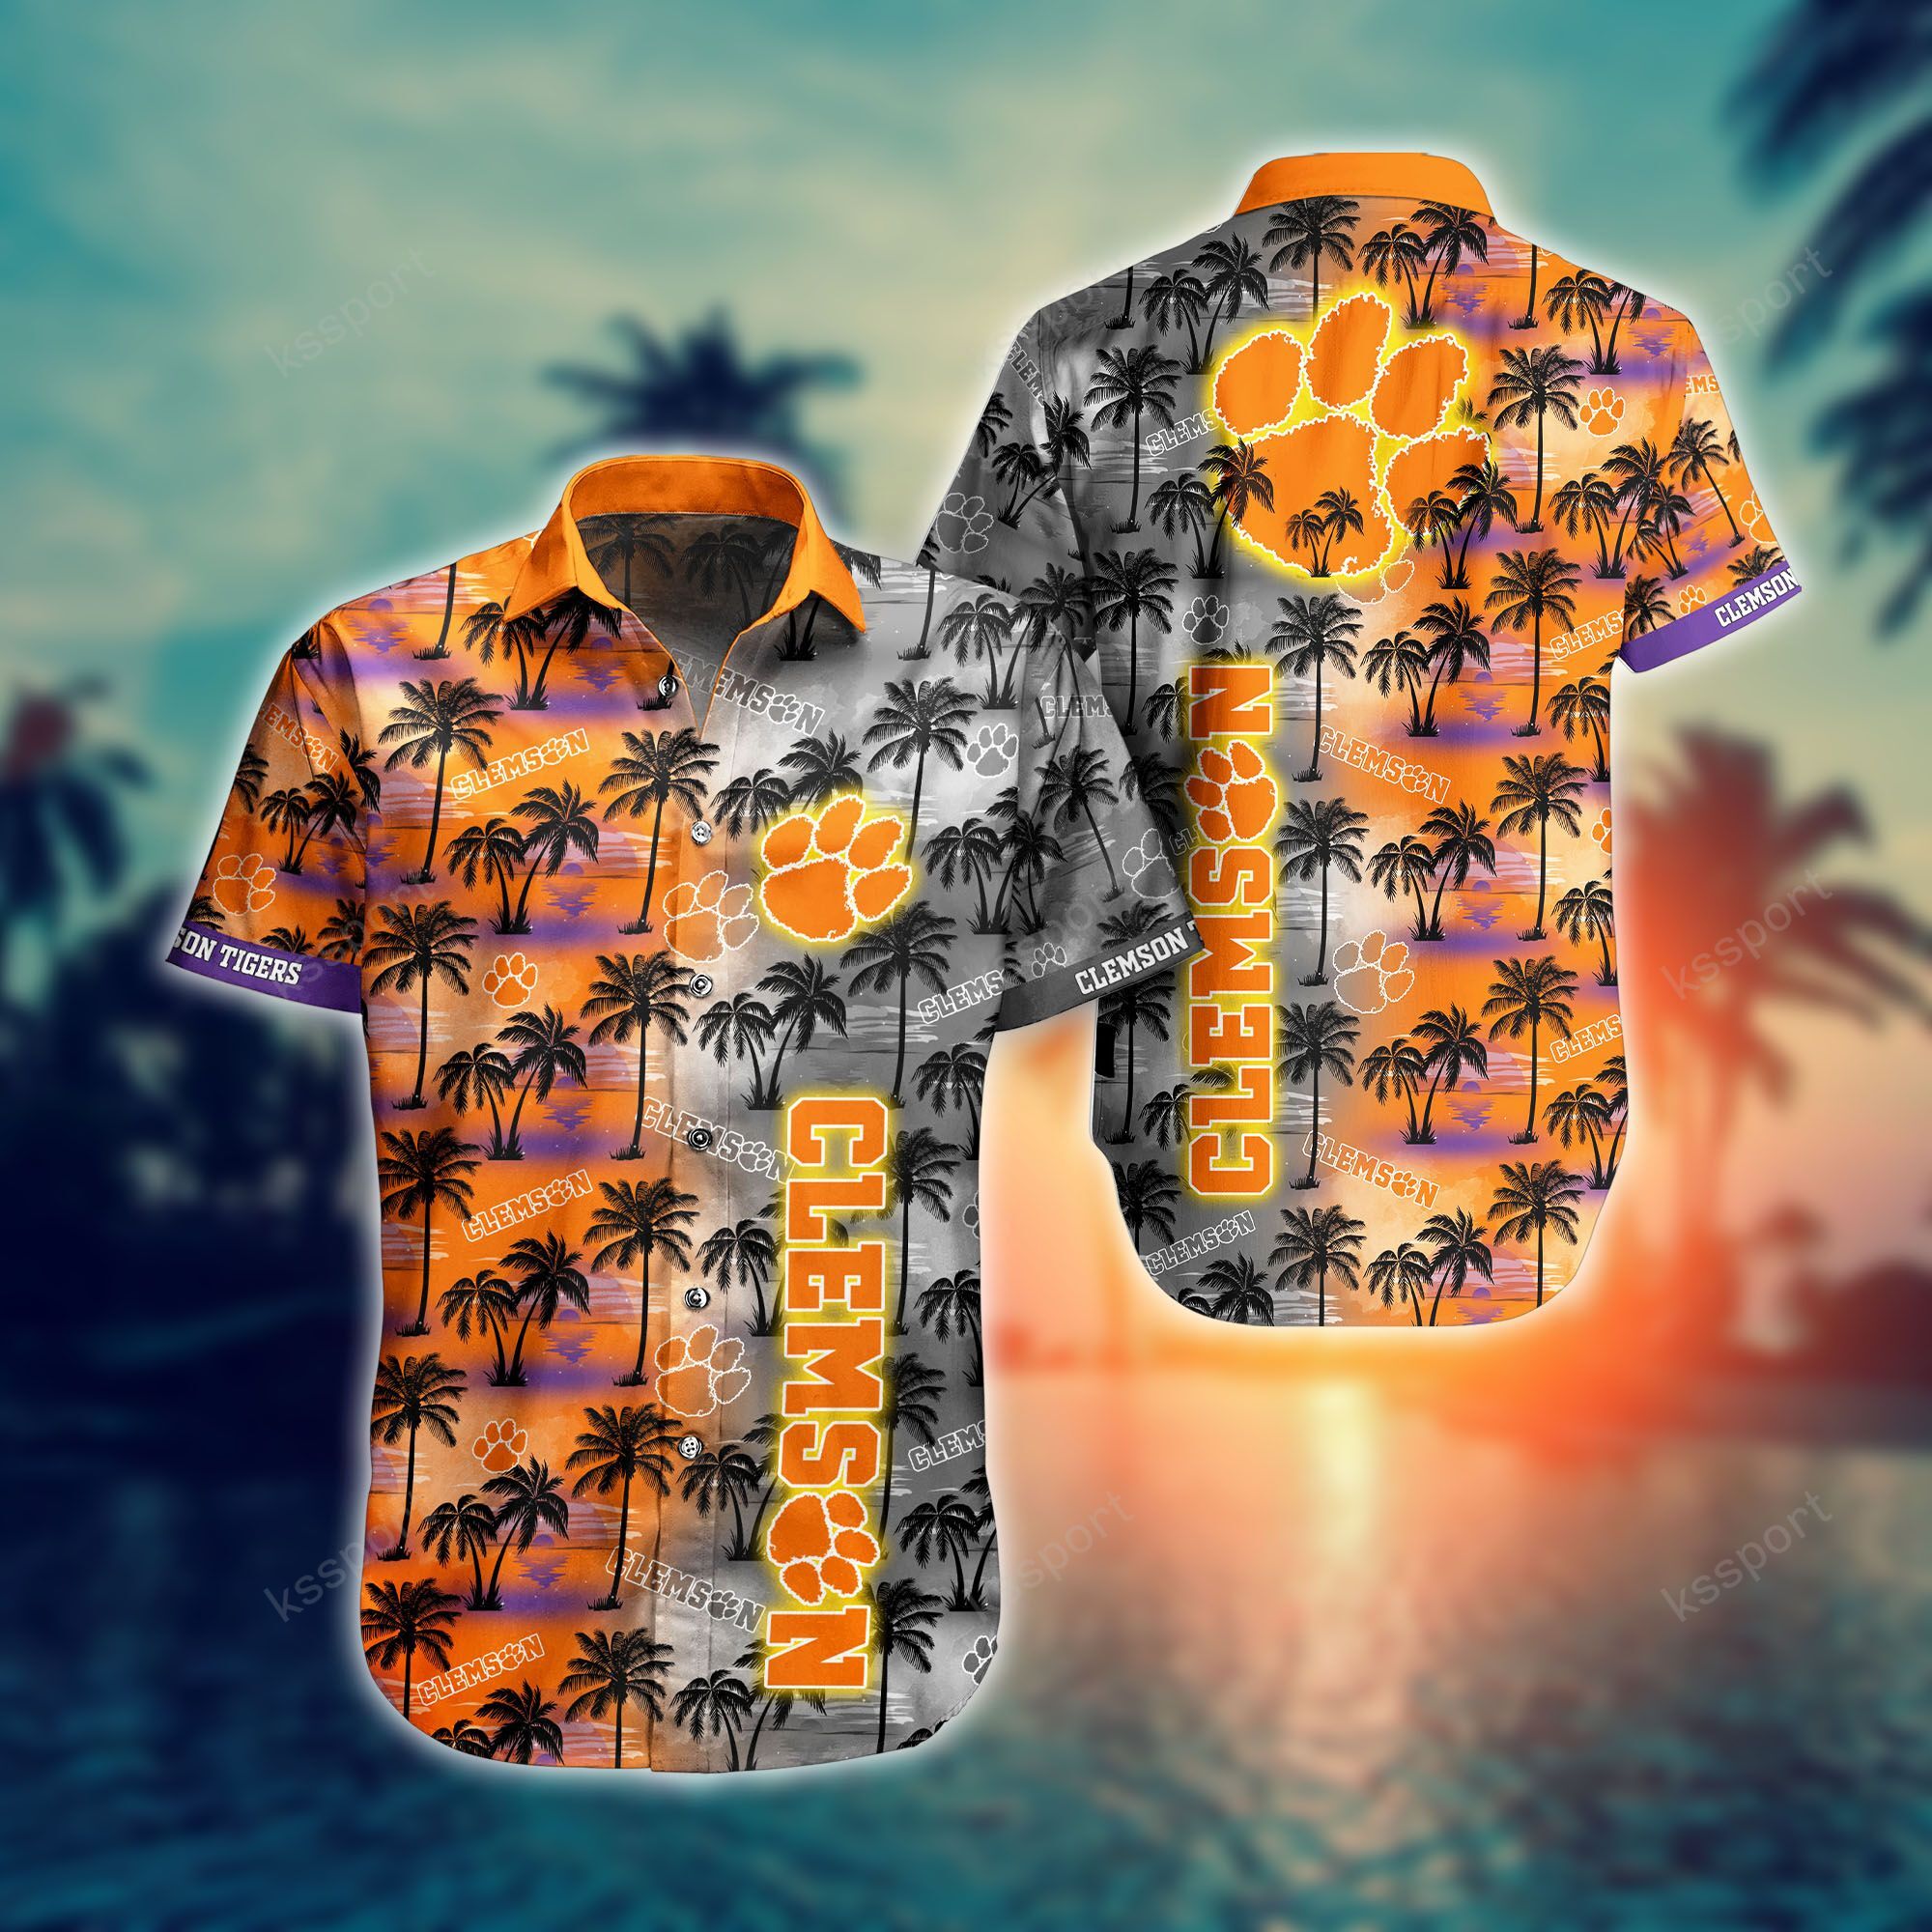 Treat yourself to a cool Hawaiian set today! 16